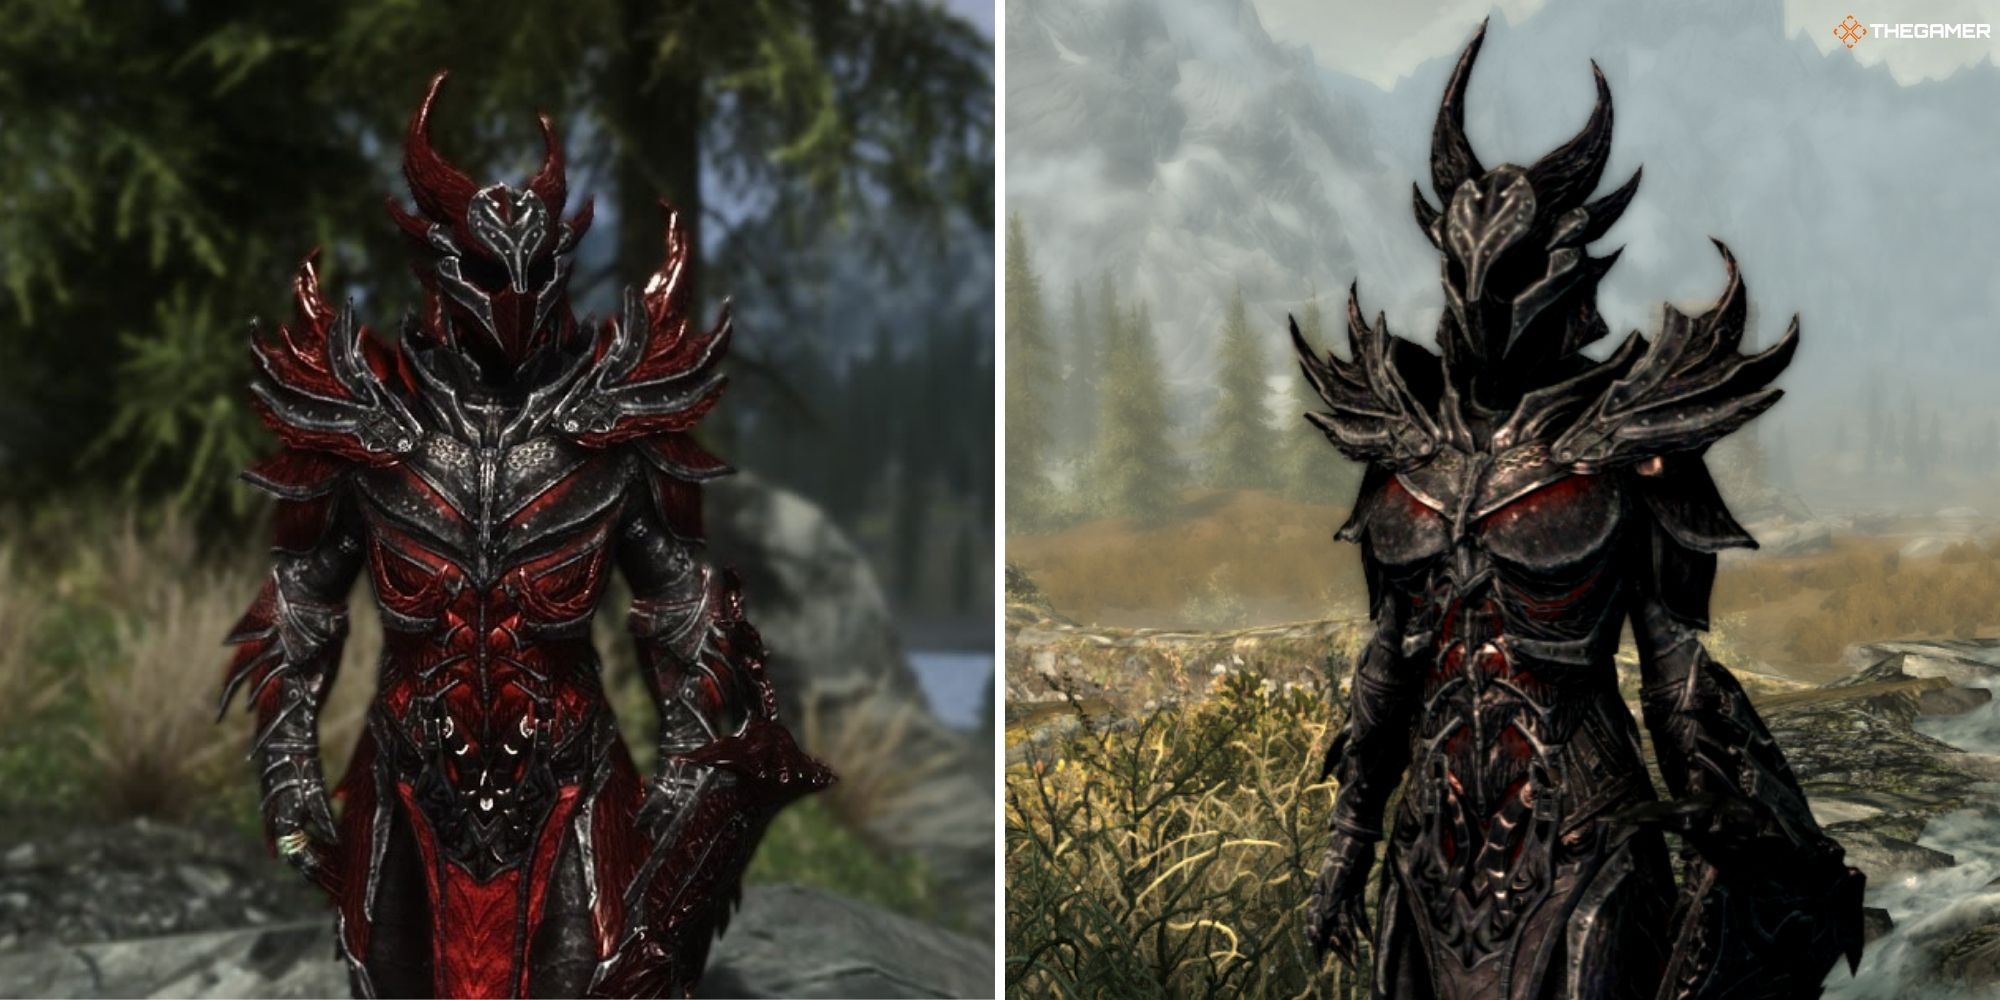 Skyrim: Best Armor Sets & How To Find Them